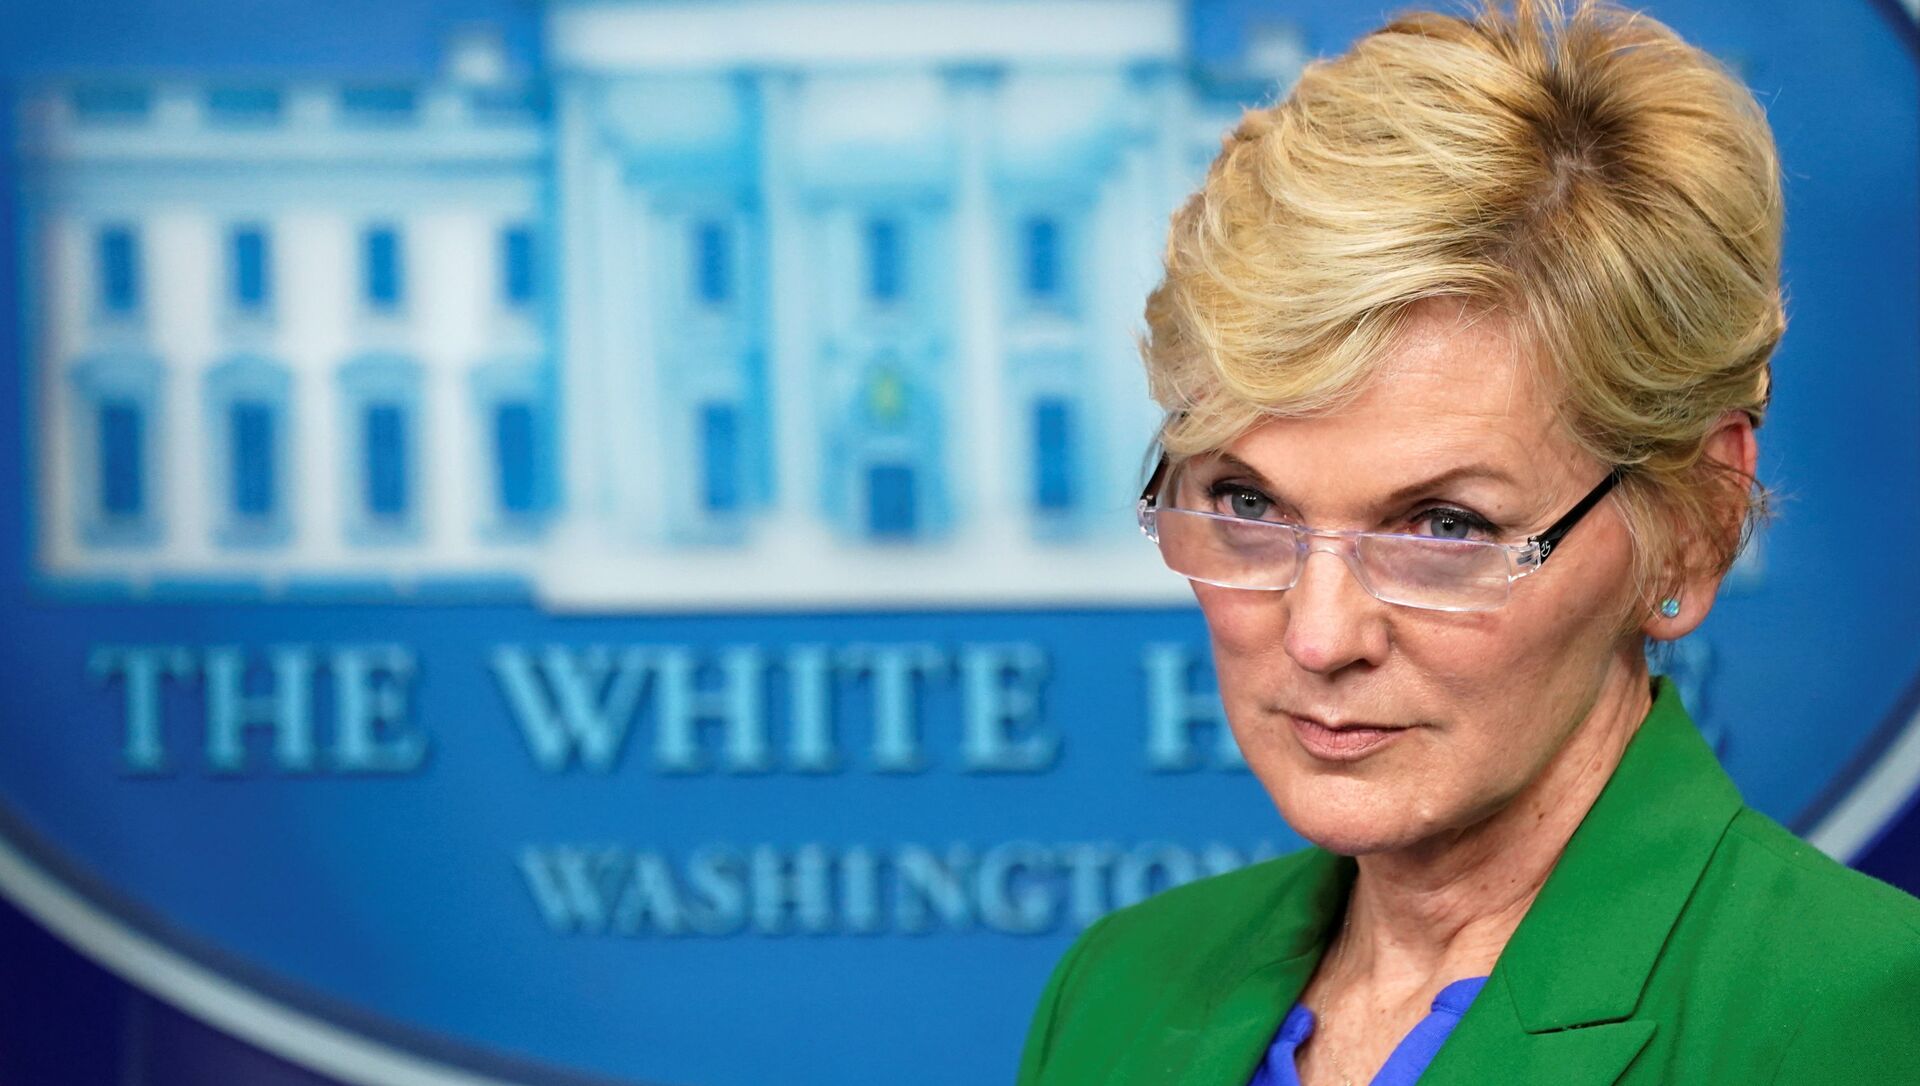 U.S. Energy Secretary Jennifer Granholm listens to a question during a press briefing about the Colonial Pipeline cyberattack shutdown, at the White House in Washington, U.S., May 11, 2021 - Sputnik International, 1920, 06.06.2021